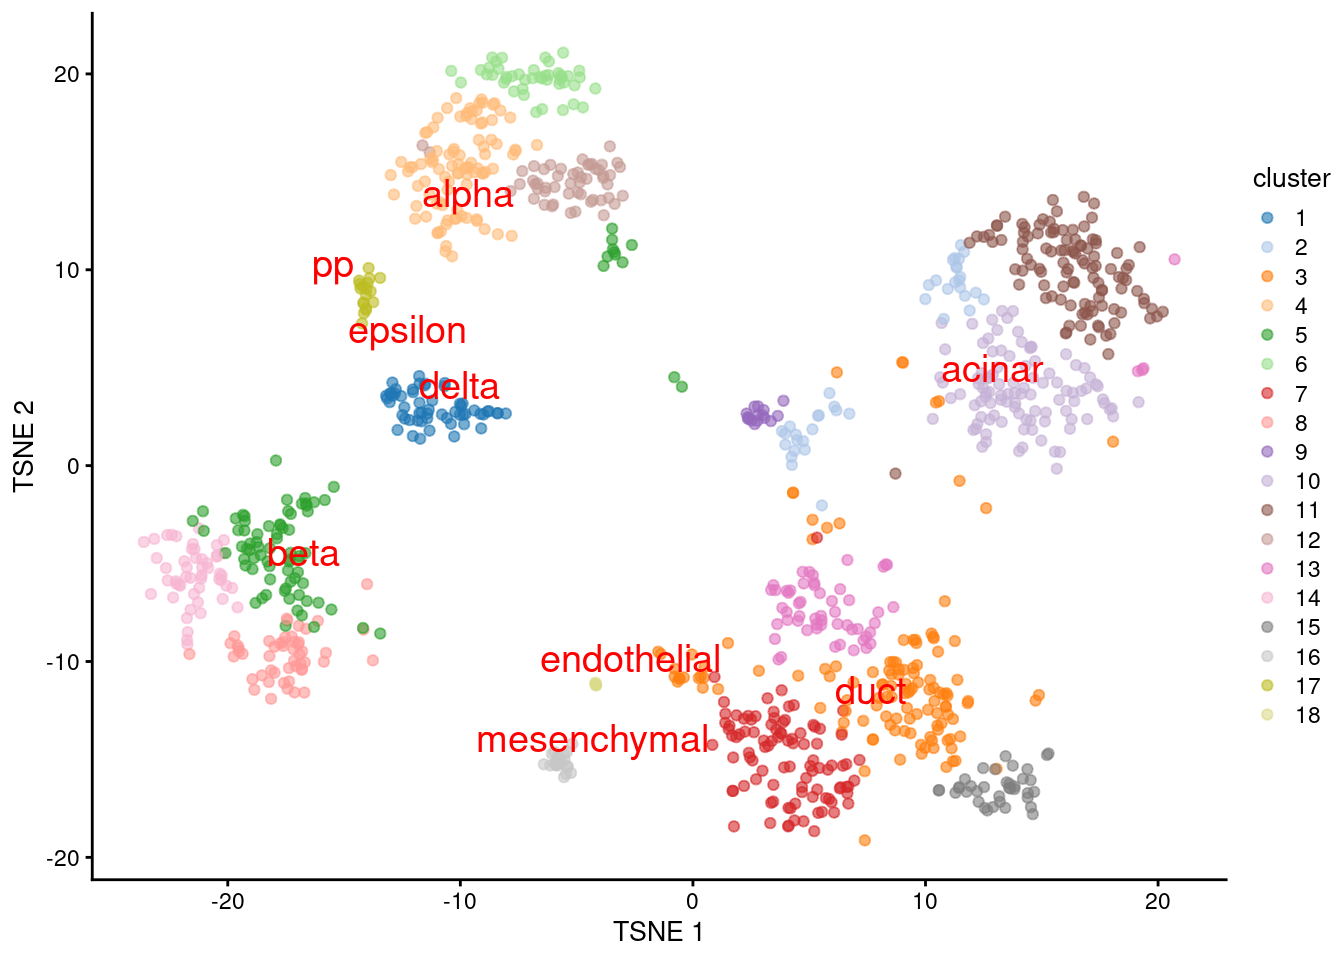 $t$-SNE plot of the Grun dataset, where each point is a cell and is colored by the assigned cluster. Reference labels from the Muraro dataset are also placed on the median coordinate across all cells assigned with that label.